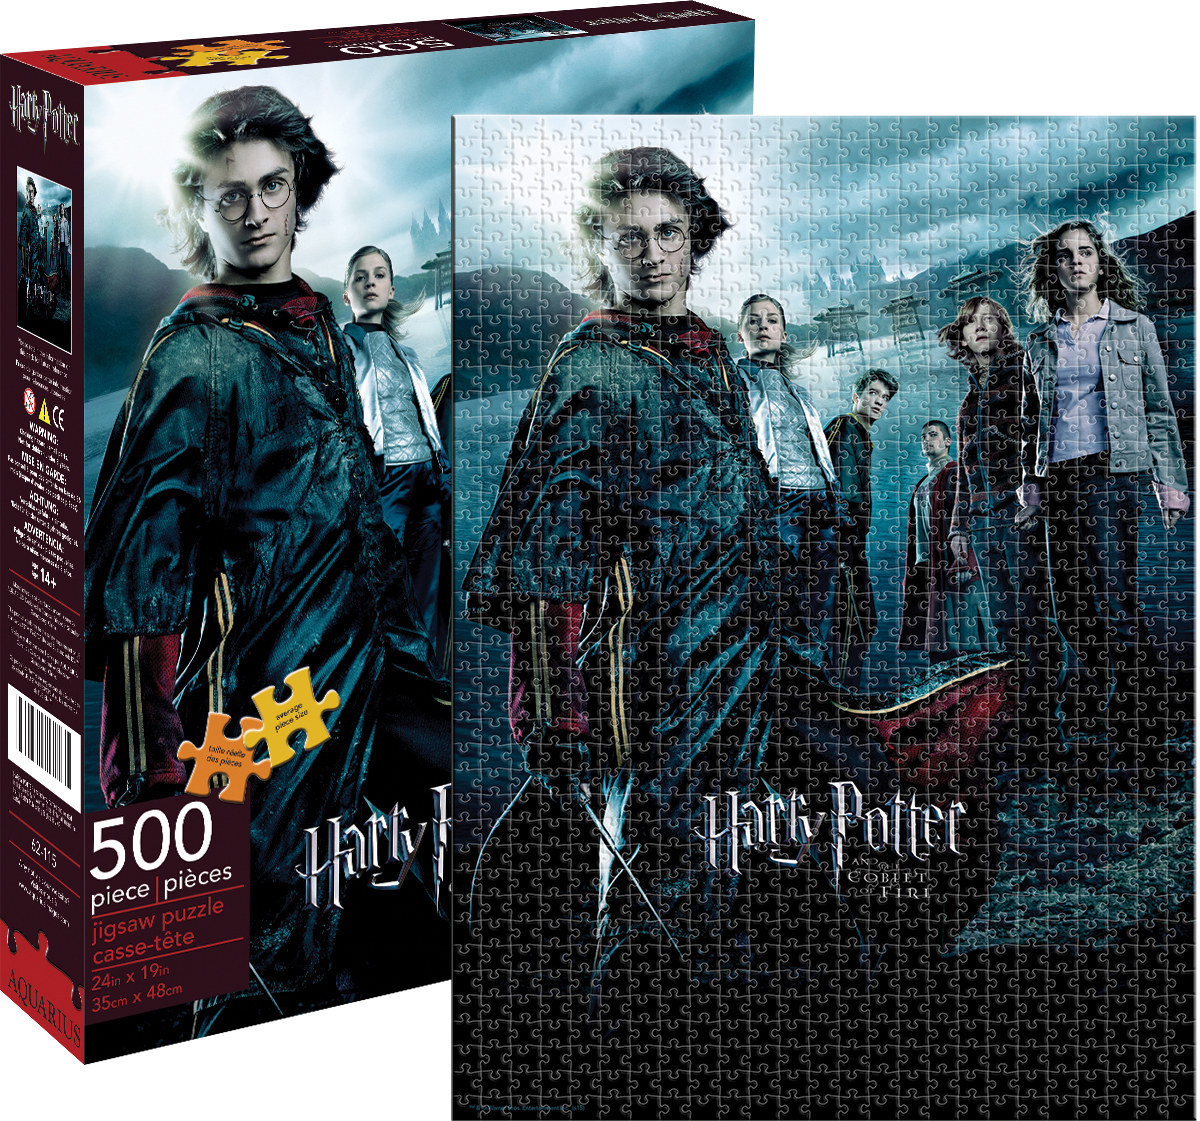 Lord of the Rings Gollum Movies & TV Jigsaw Puzzle By Aquarius